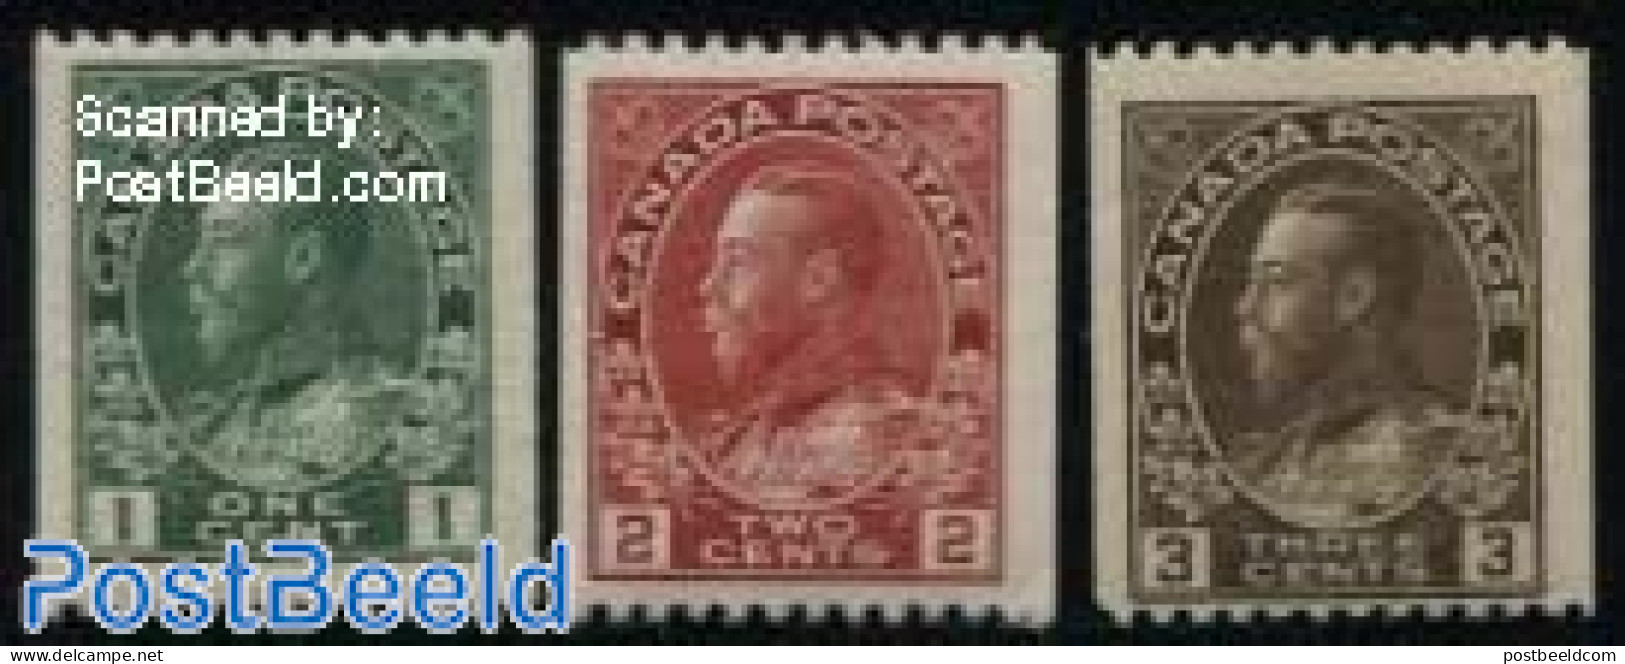 Canada 1911 Definitives Coil, Vertical Imperforated 3v, Hor. Perf. 121, Mint NH - Unused Stamps